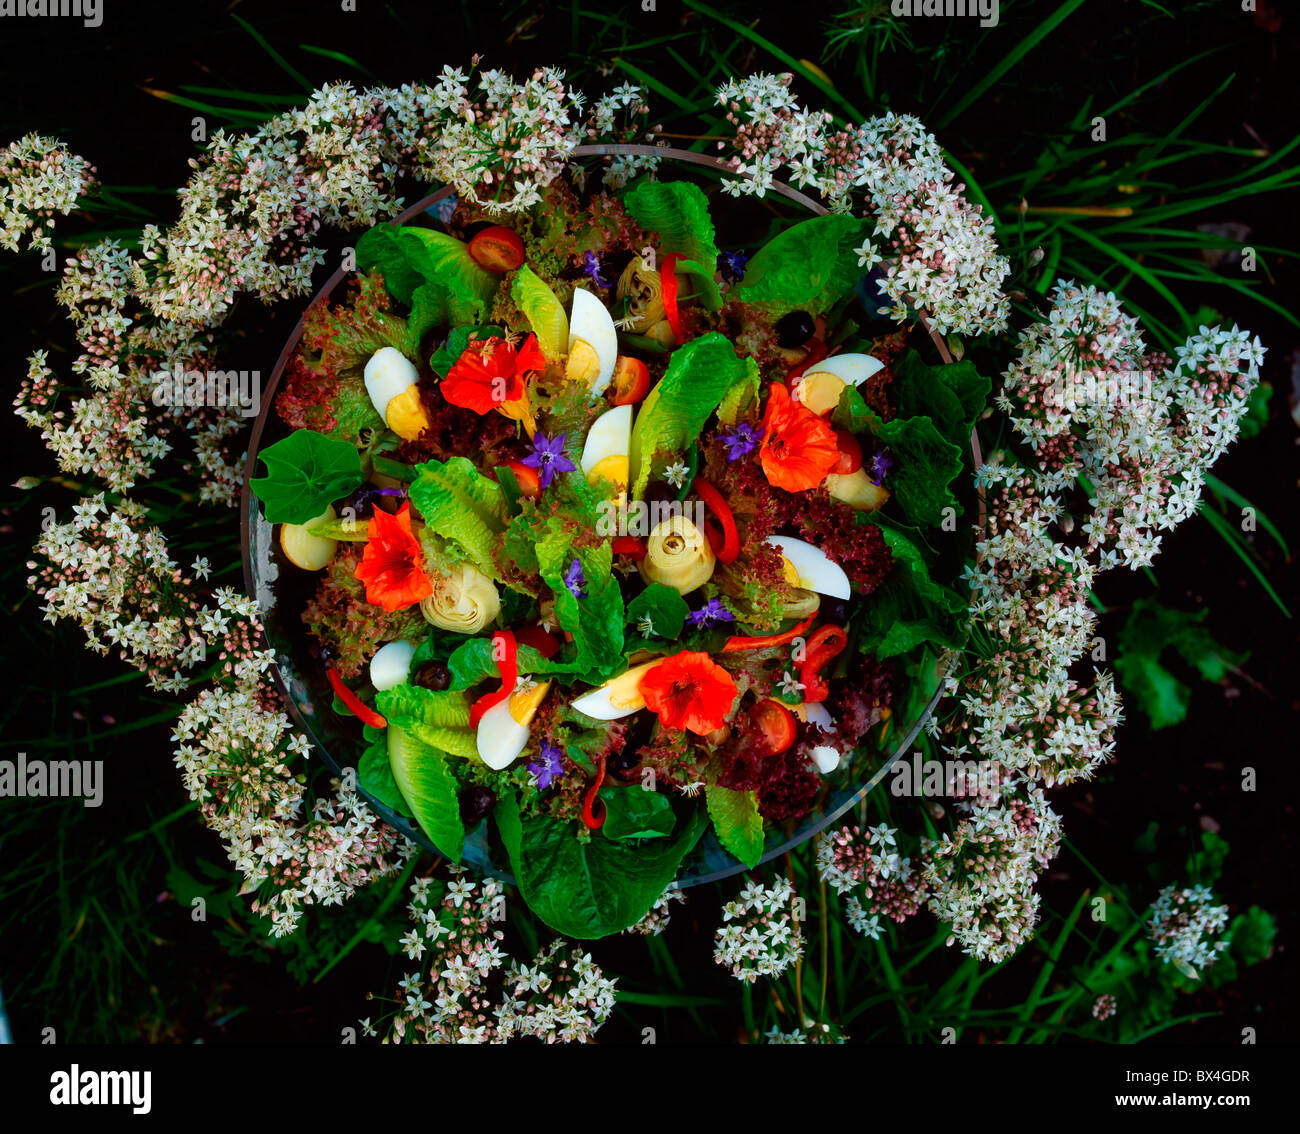 Mixed Leaf And Vegetable Salad Stock Photo